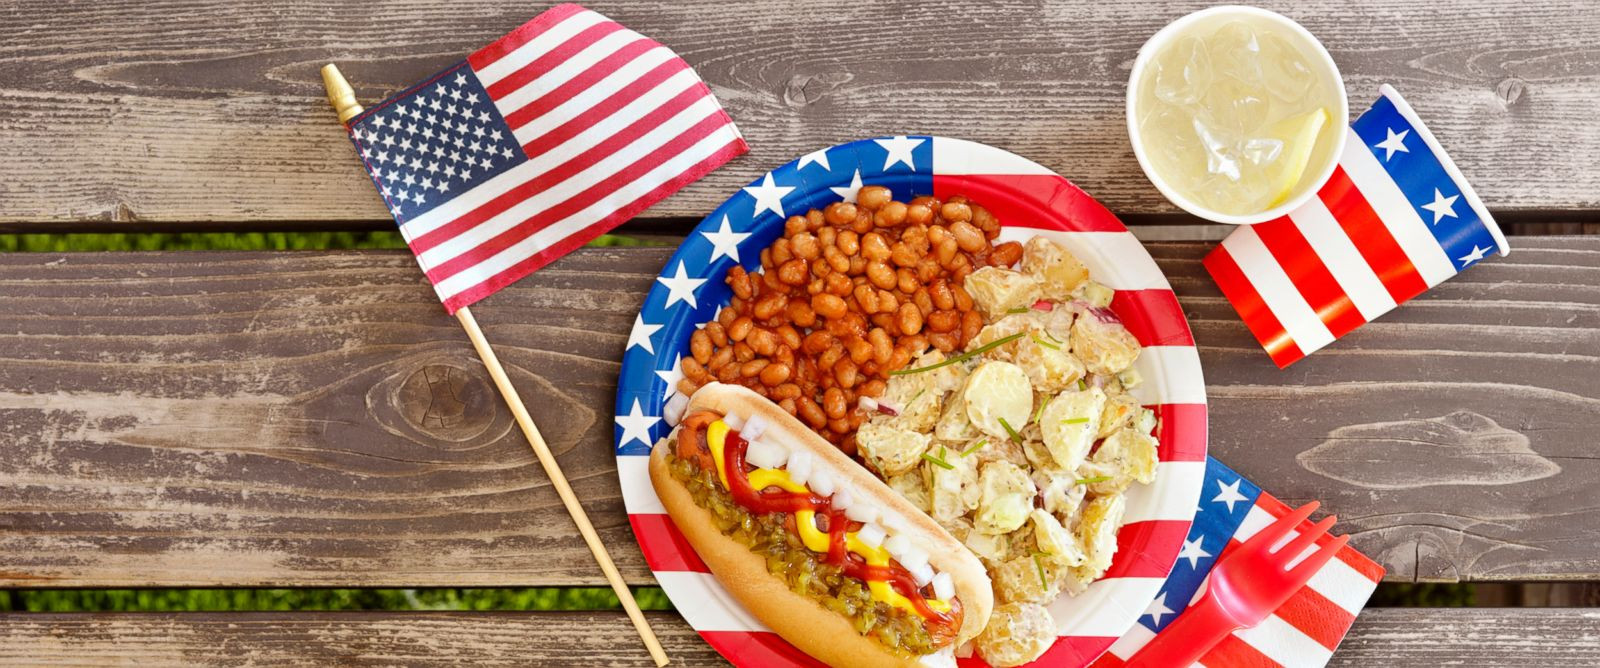 Memorial Day Free Food
 A few precautions could help keep your Memorial Day